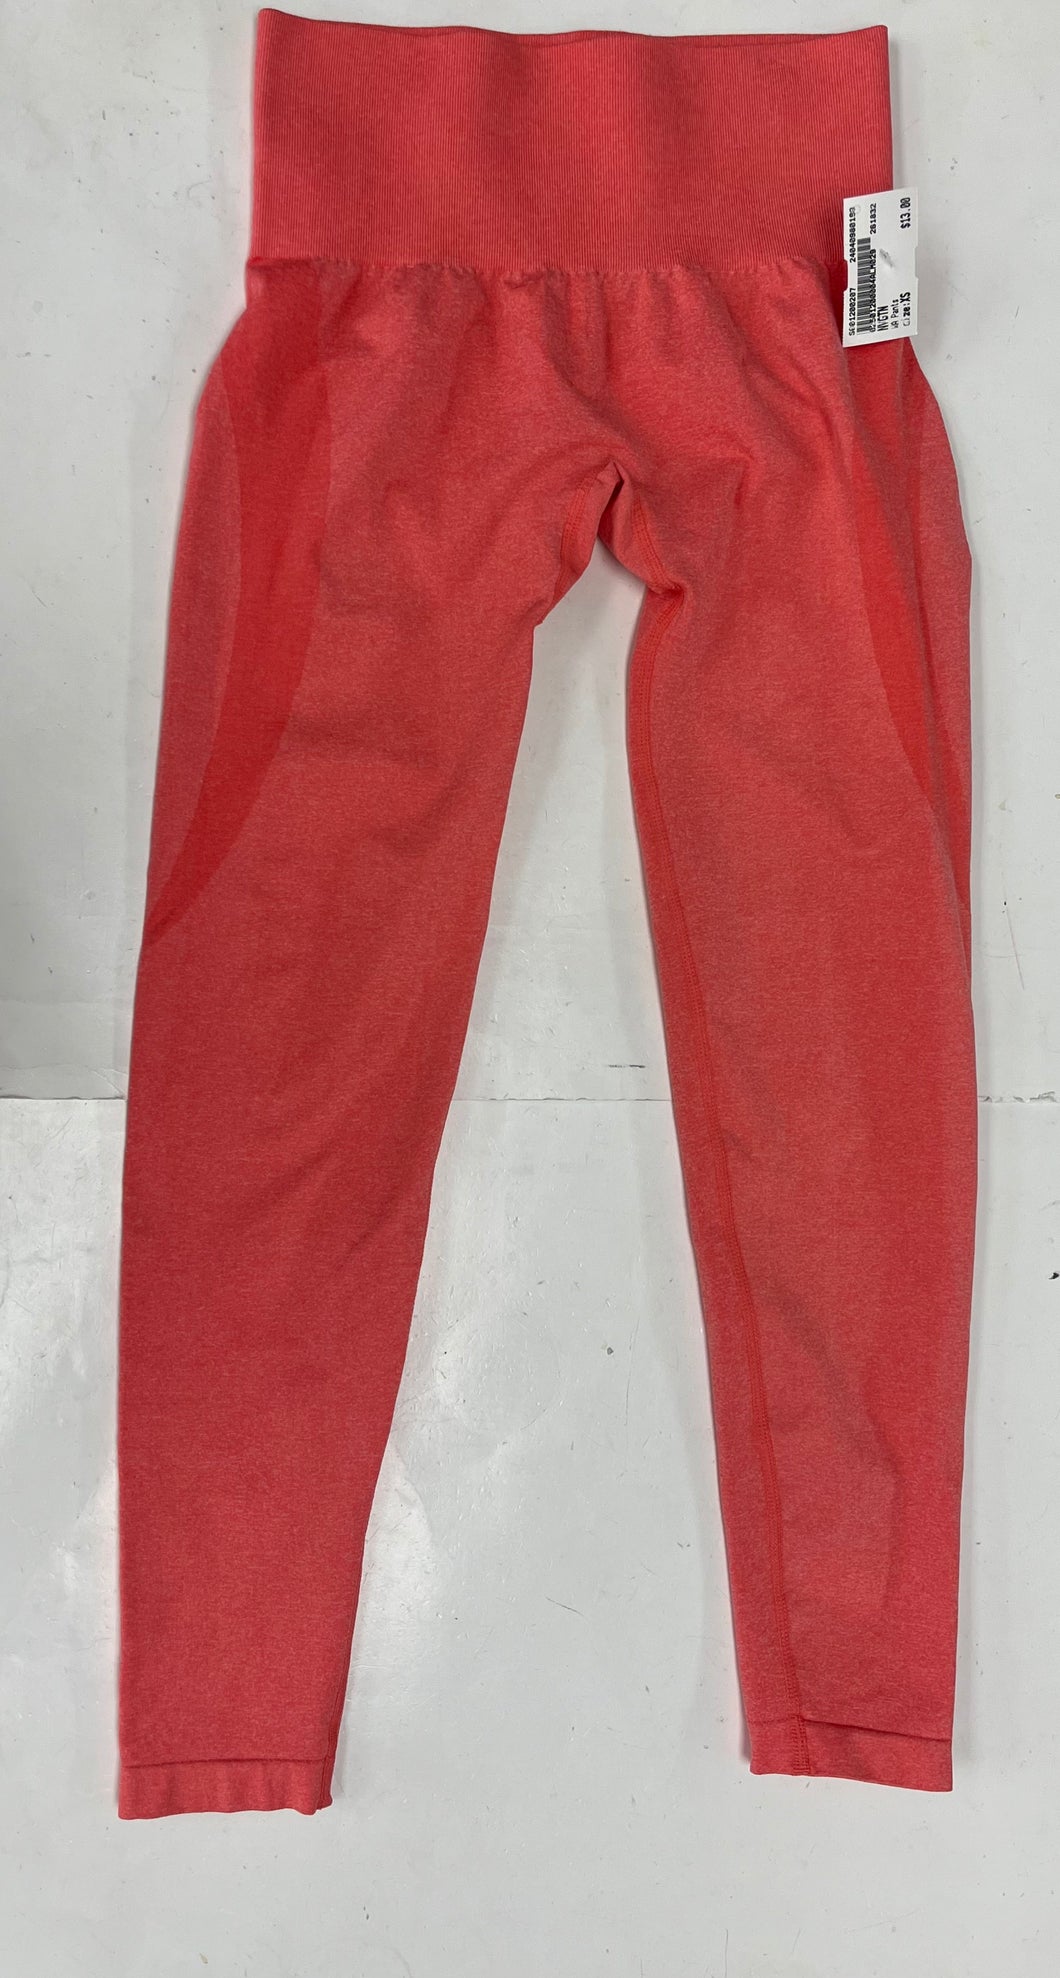 Nvgtn Athletic Pants Size Extra Small